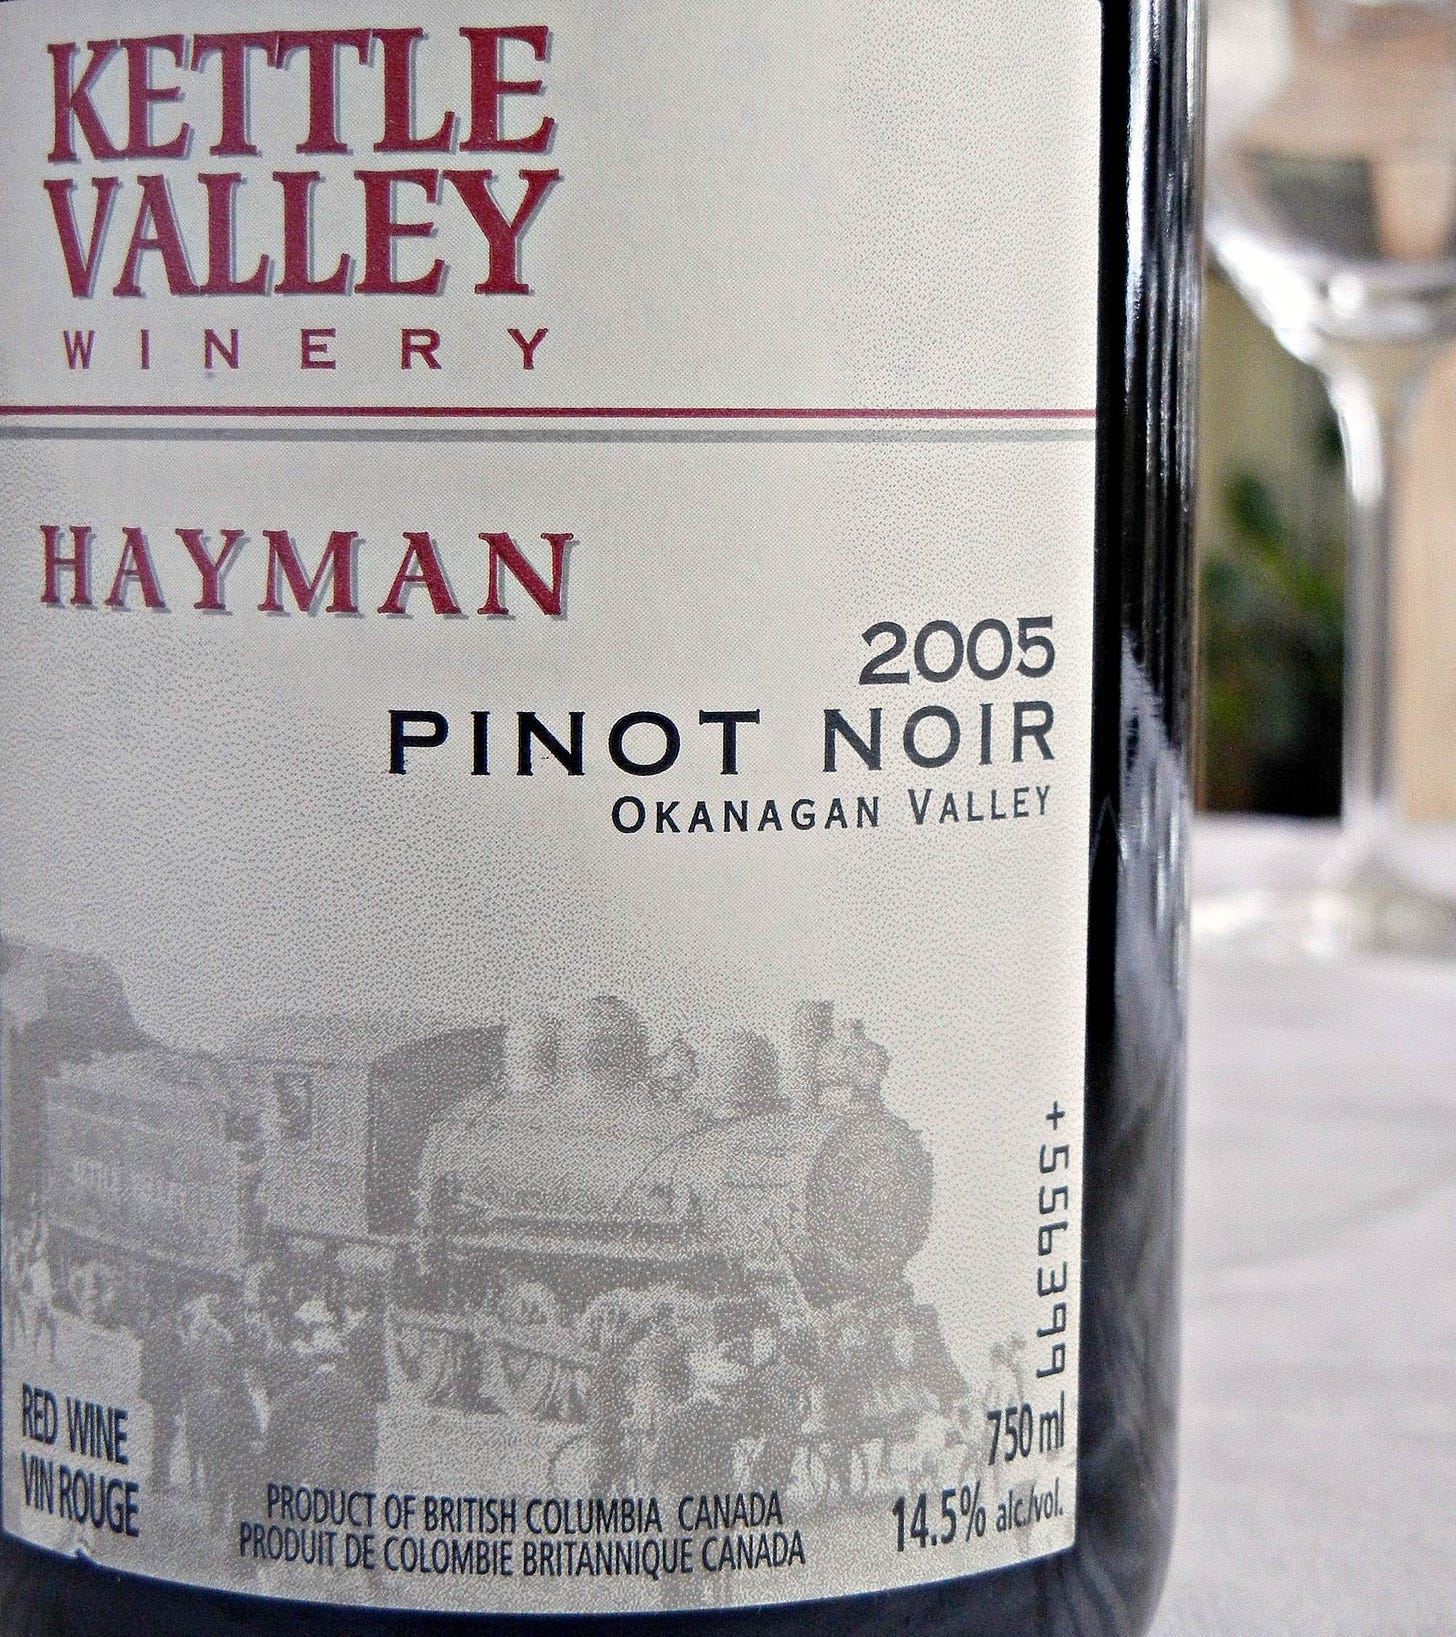 Kettle Valley Hayman Pinot Noir 2005 Label - BC Pinot Noir Tasting Review 25